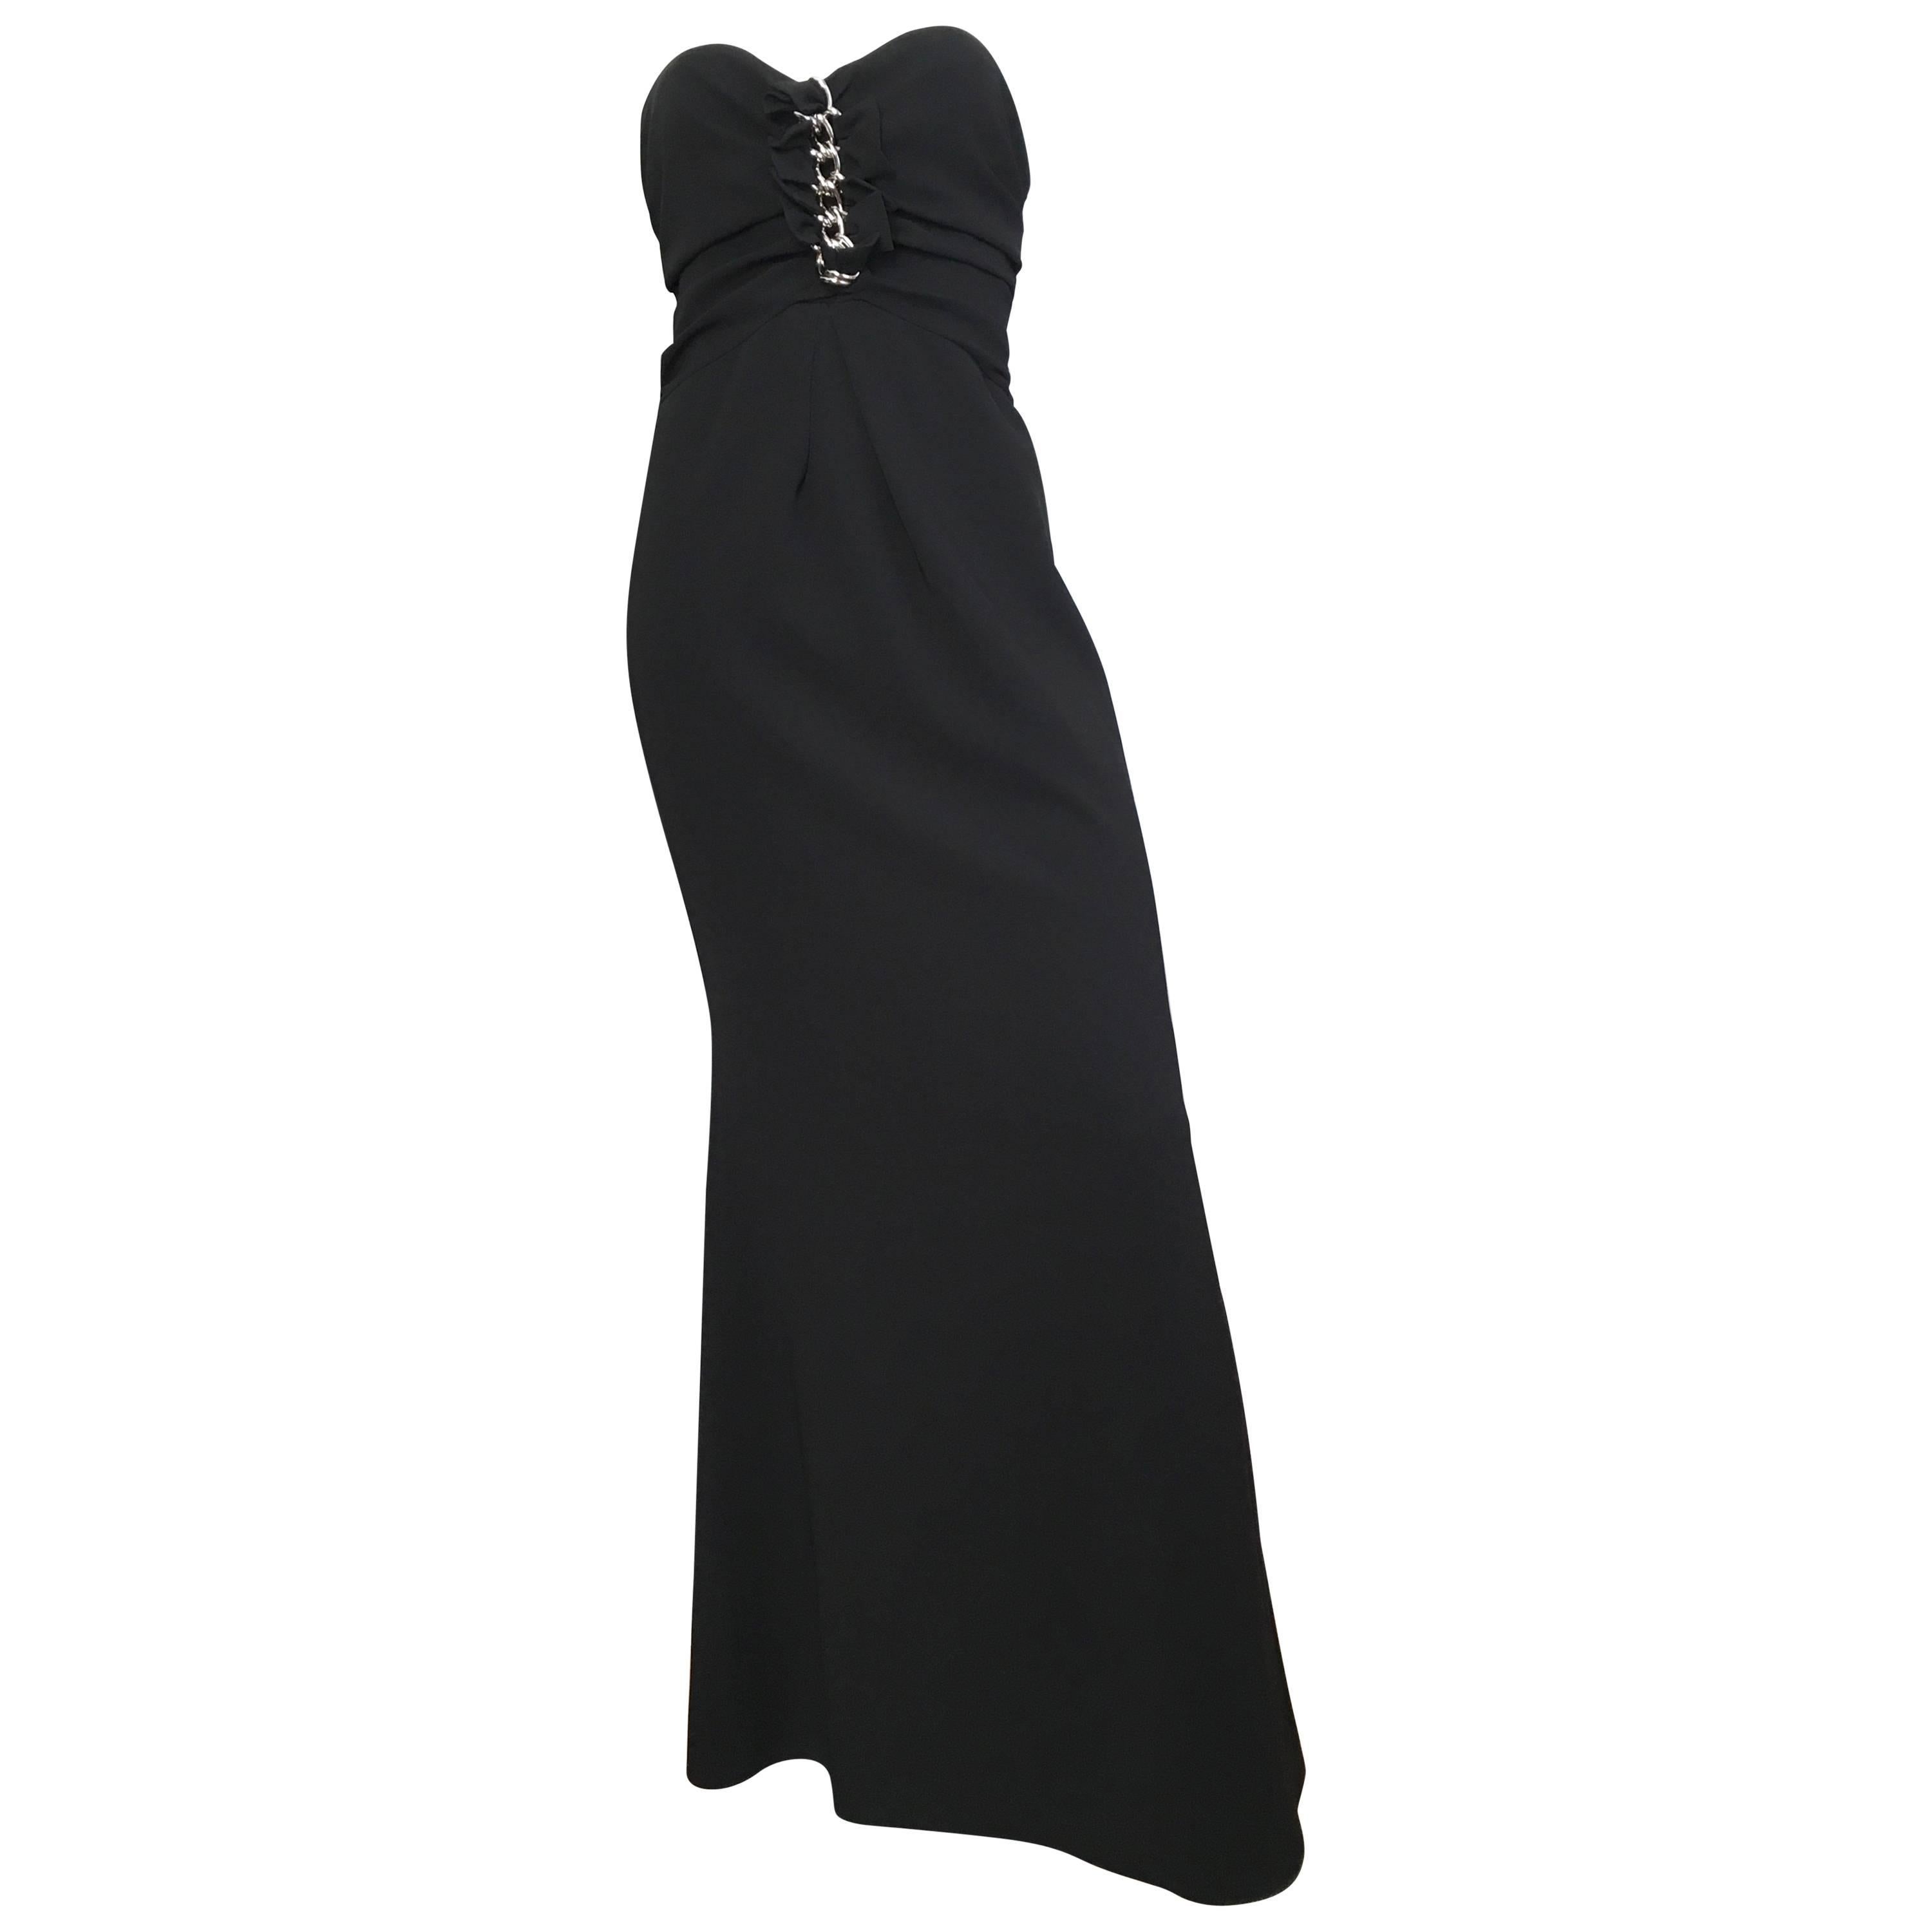 Moschino Black Strapless Gown Size 6. For Sale